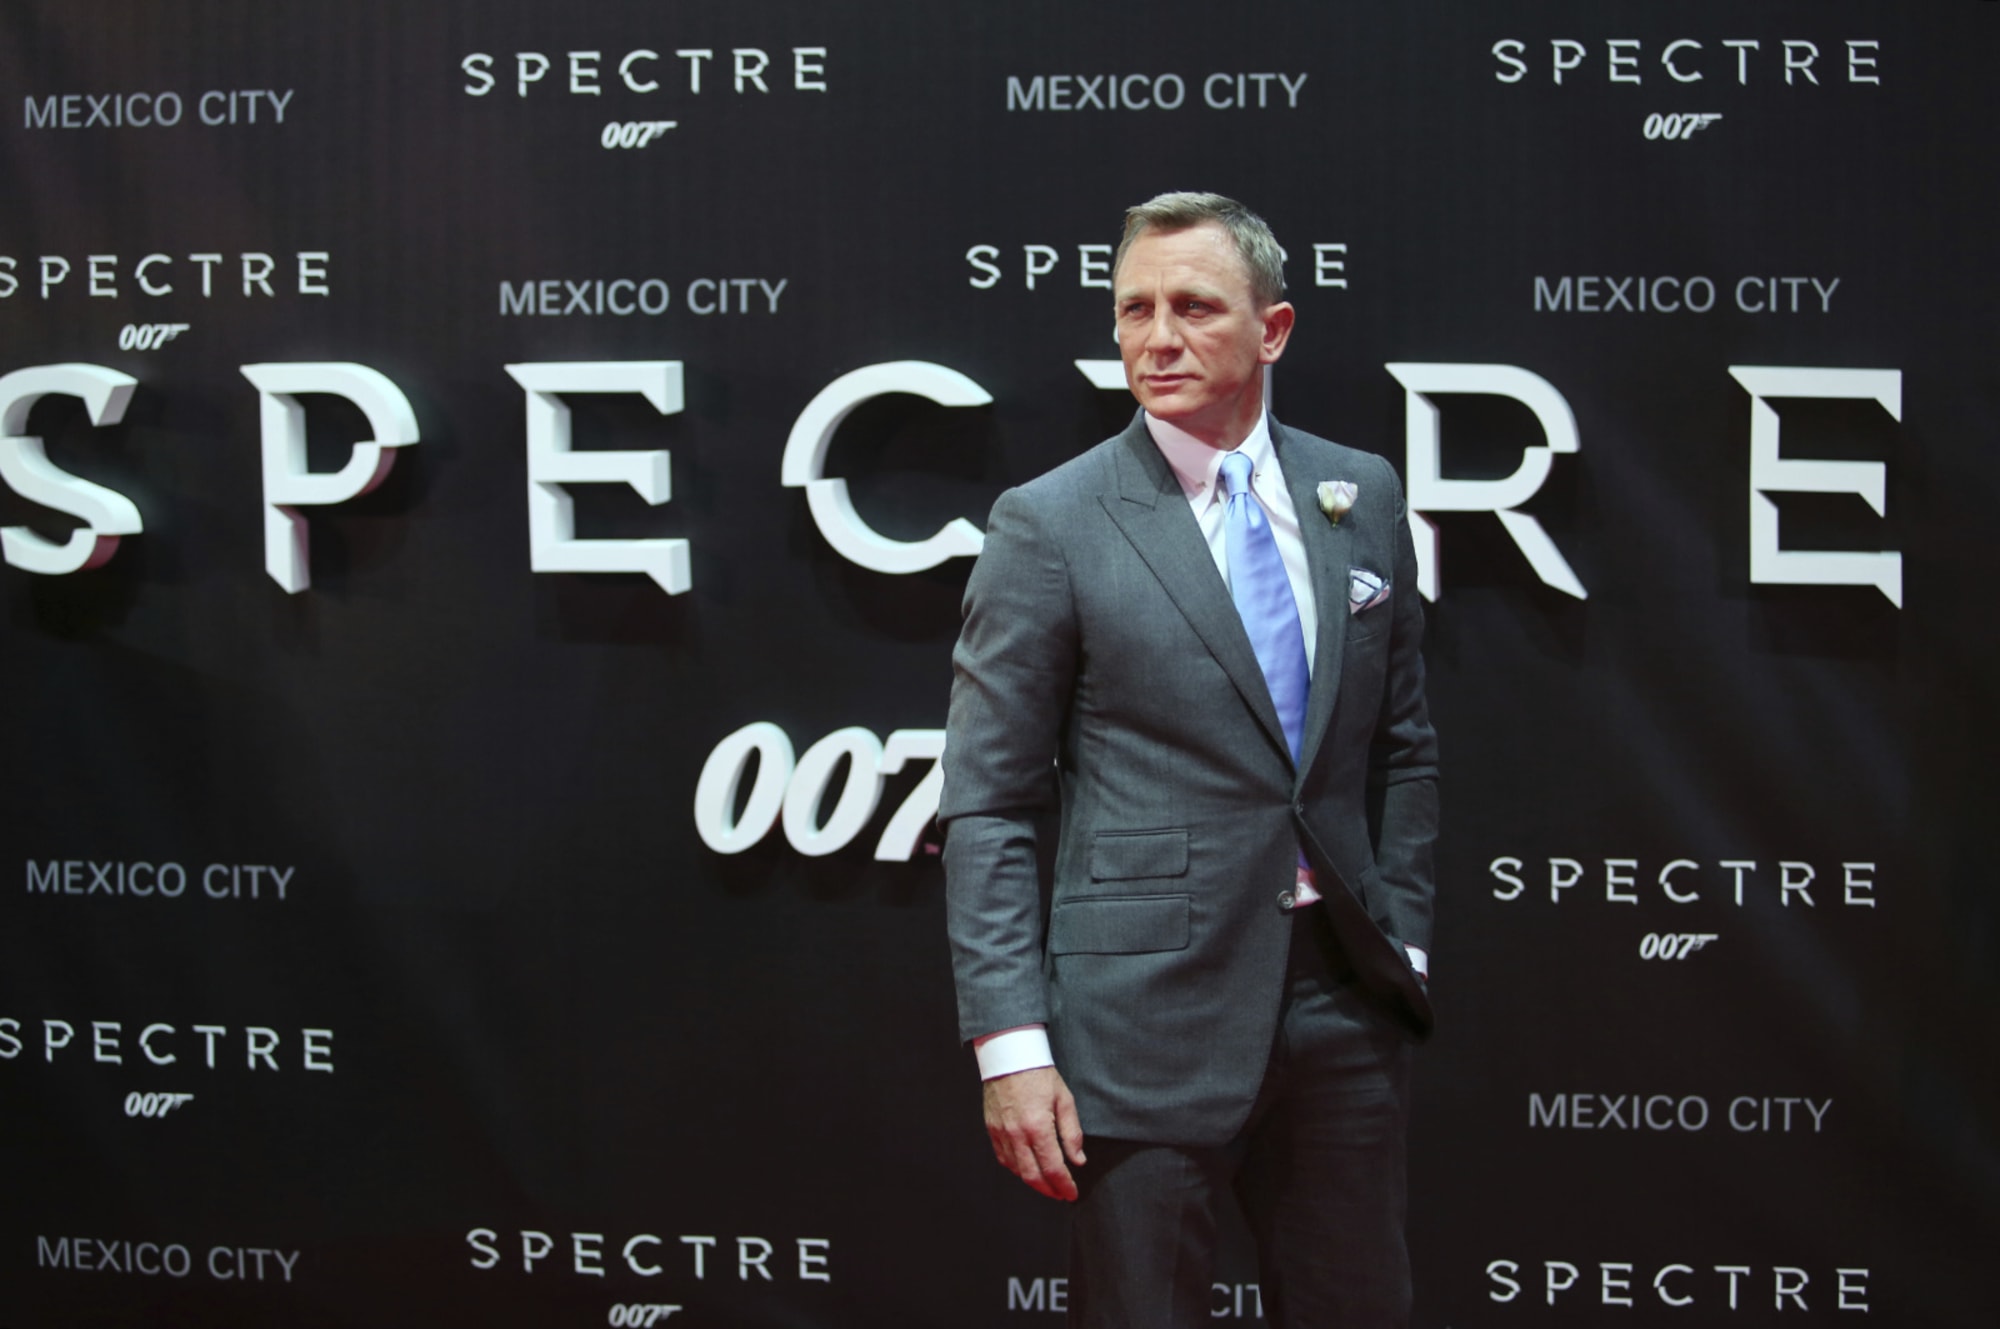 What James Bond films will be available on Netflix in the United States in 2021?